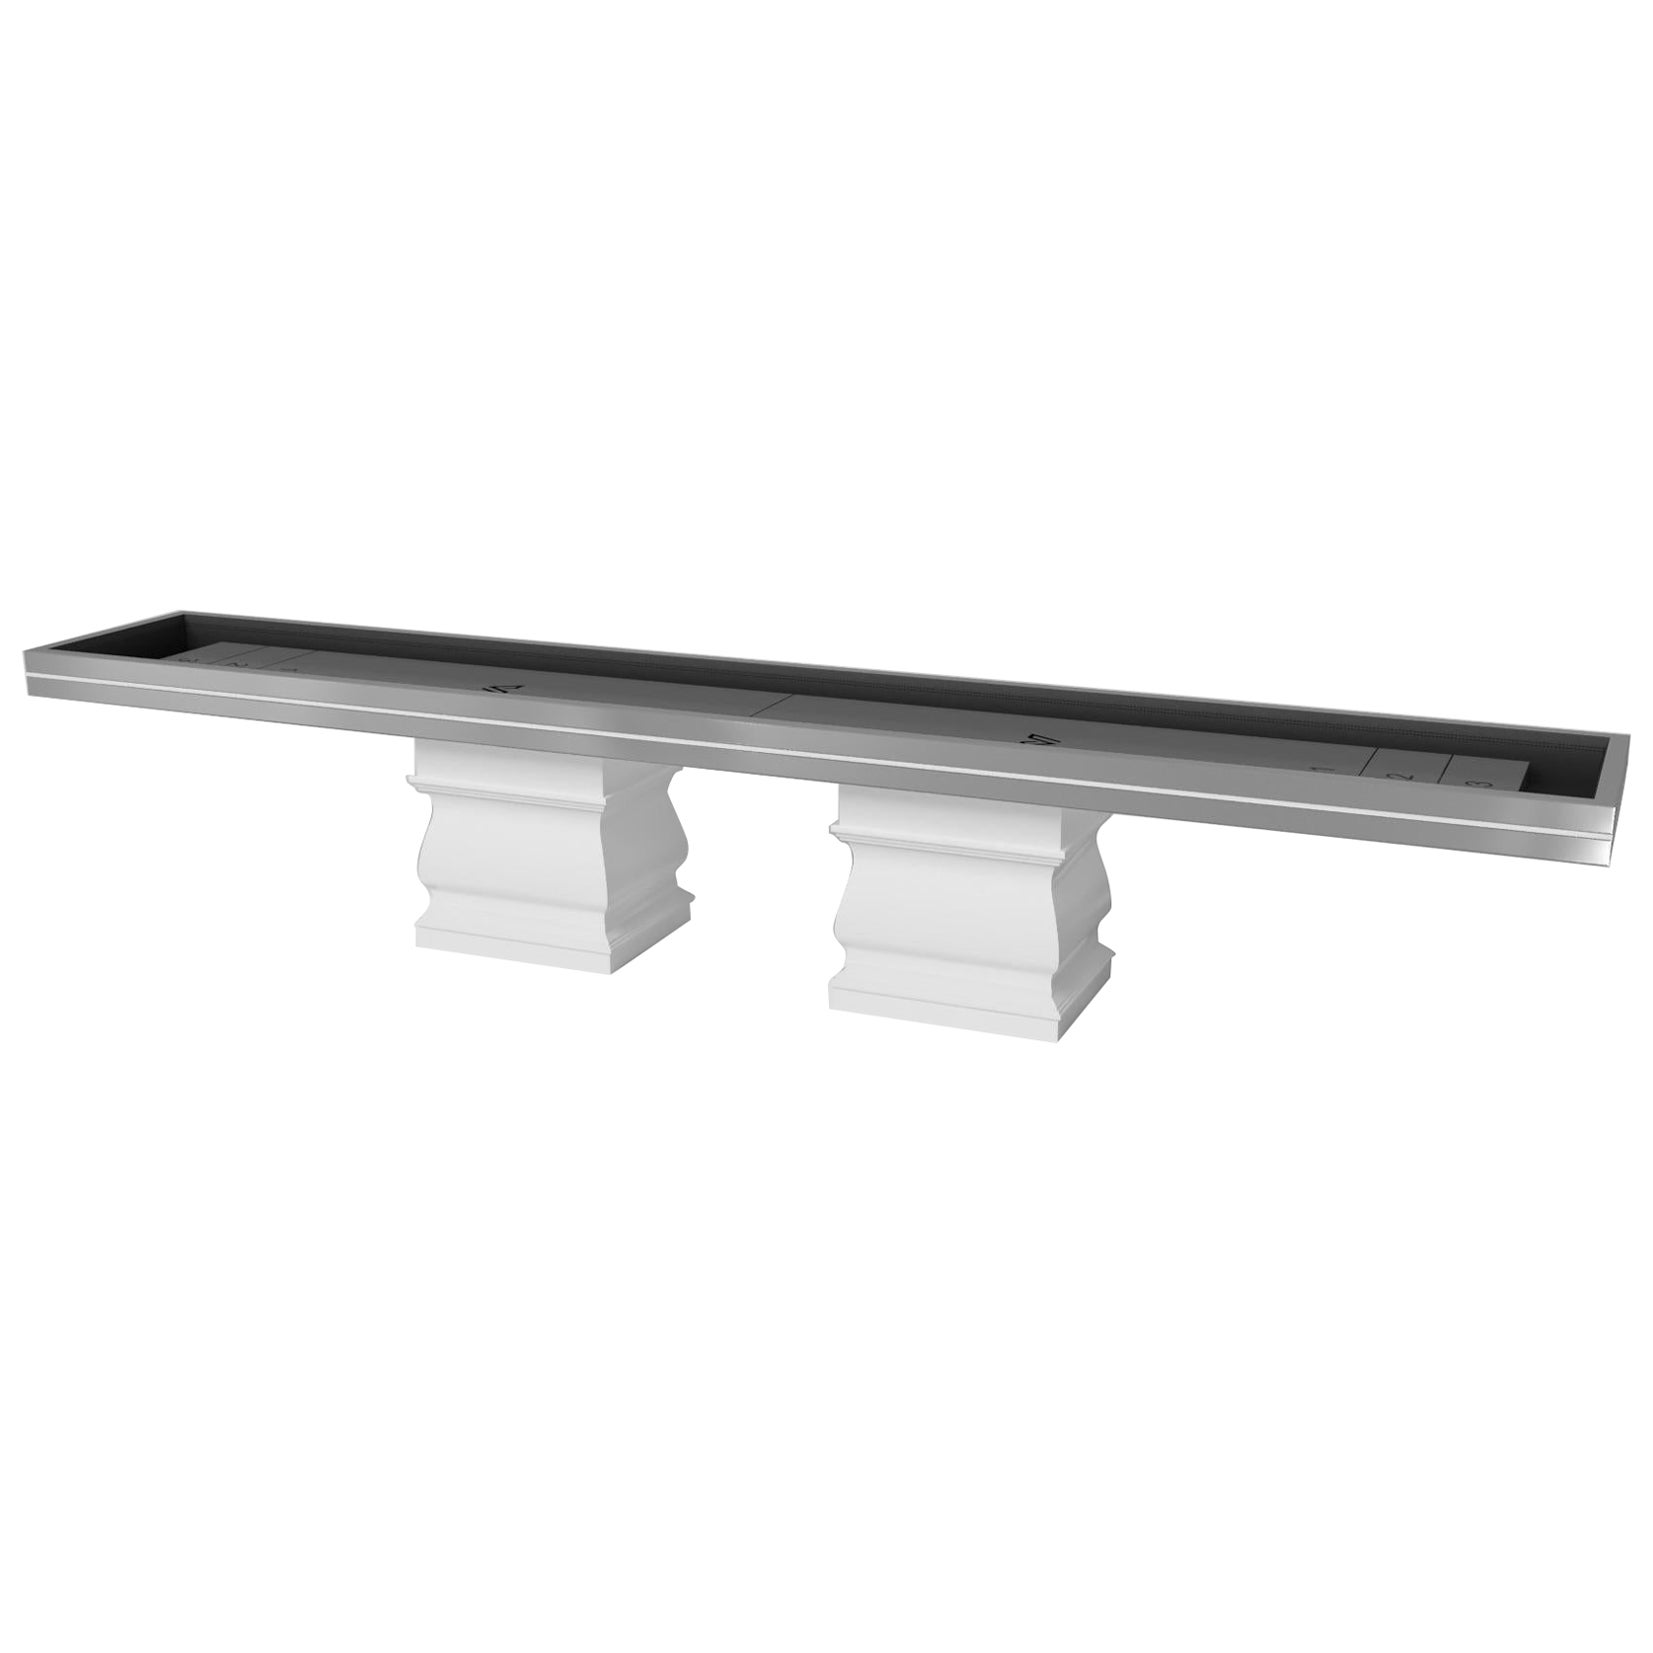 Elevate Customs Baluster Shuffleboard / Stainless Steel Sheet Metal in 16' - USA For Sale